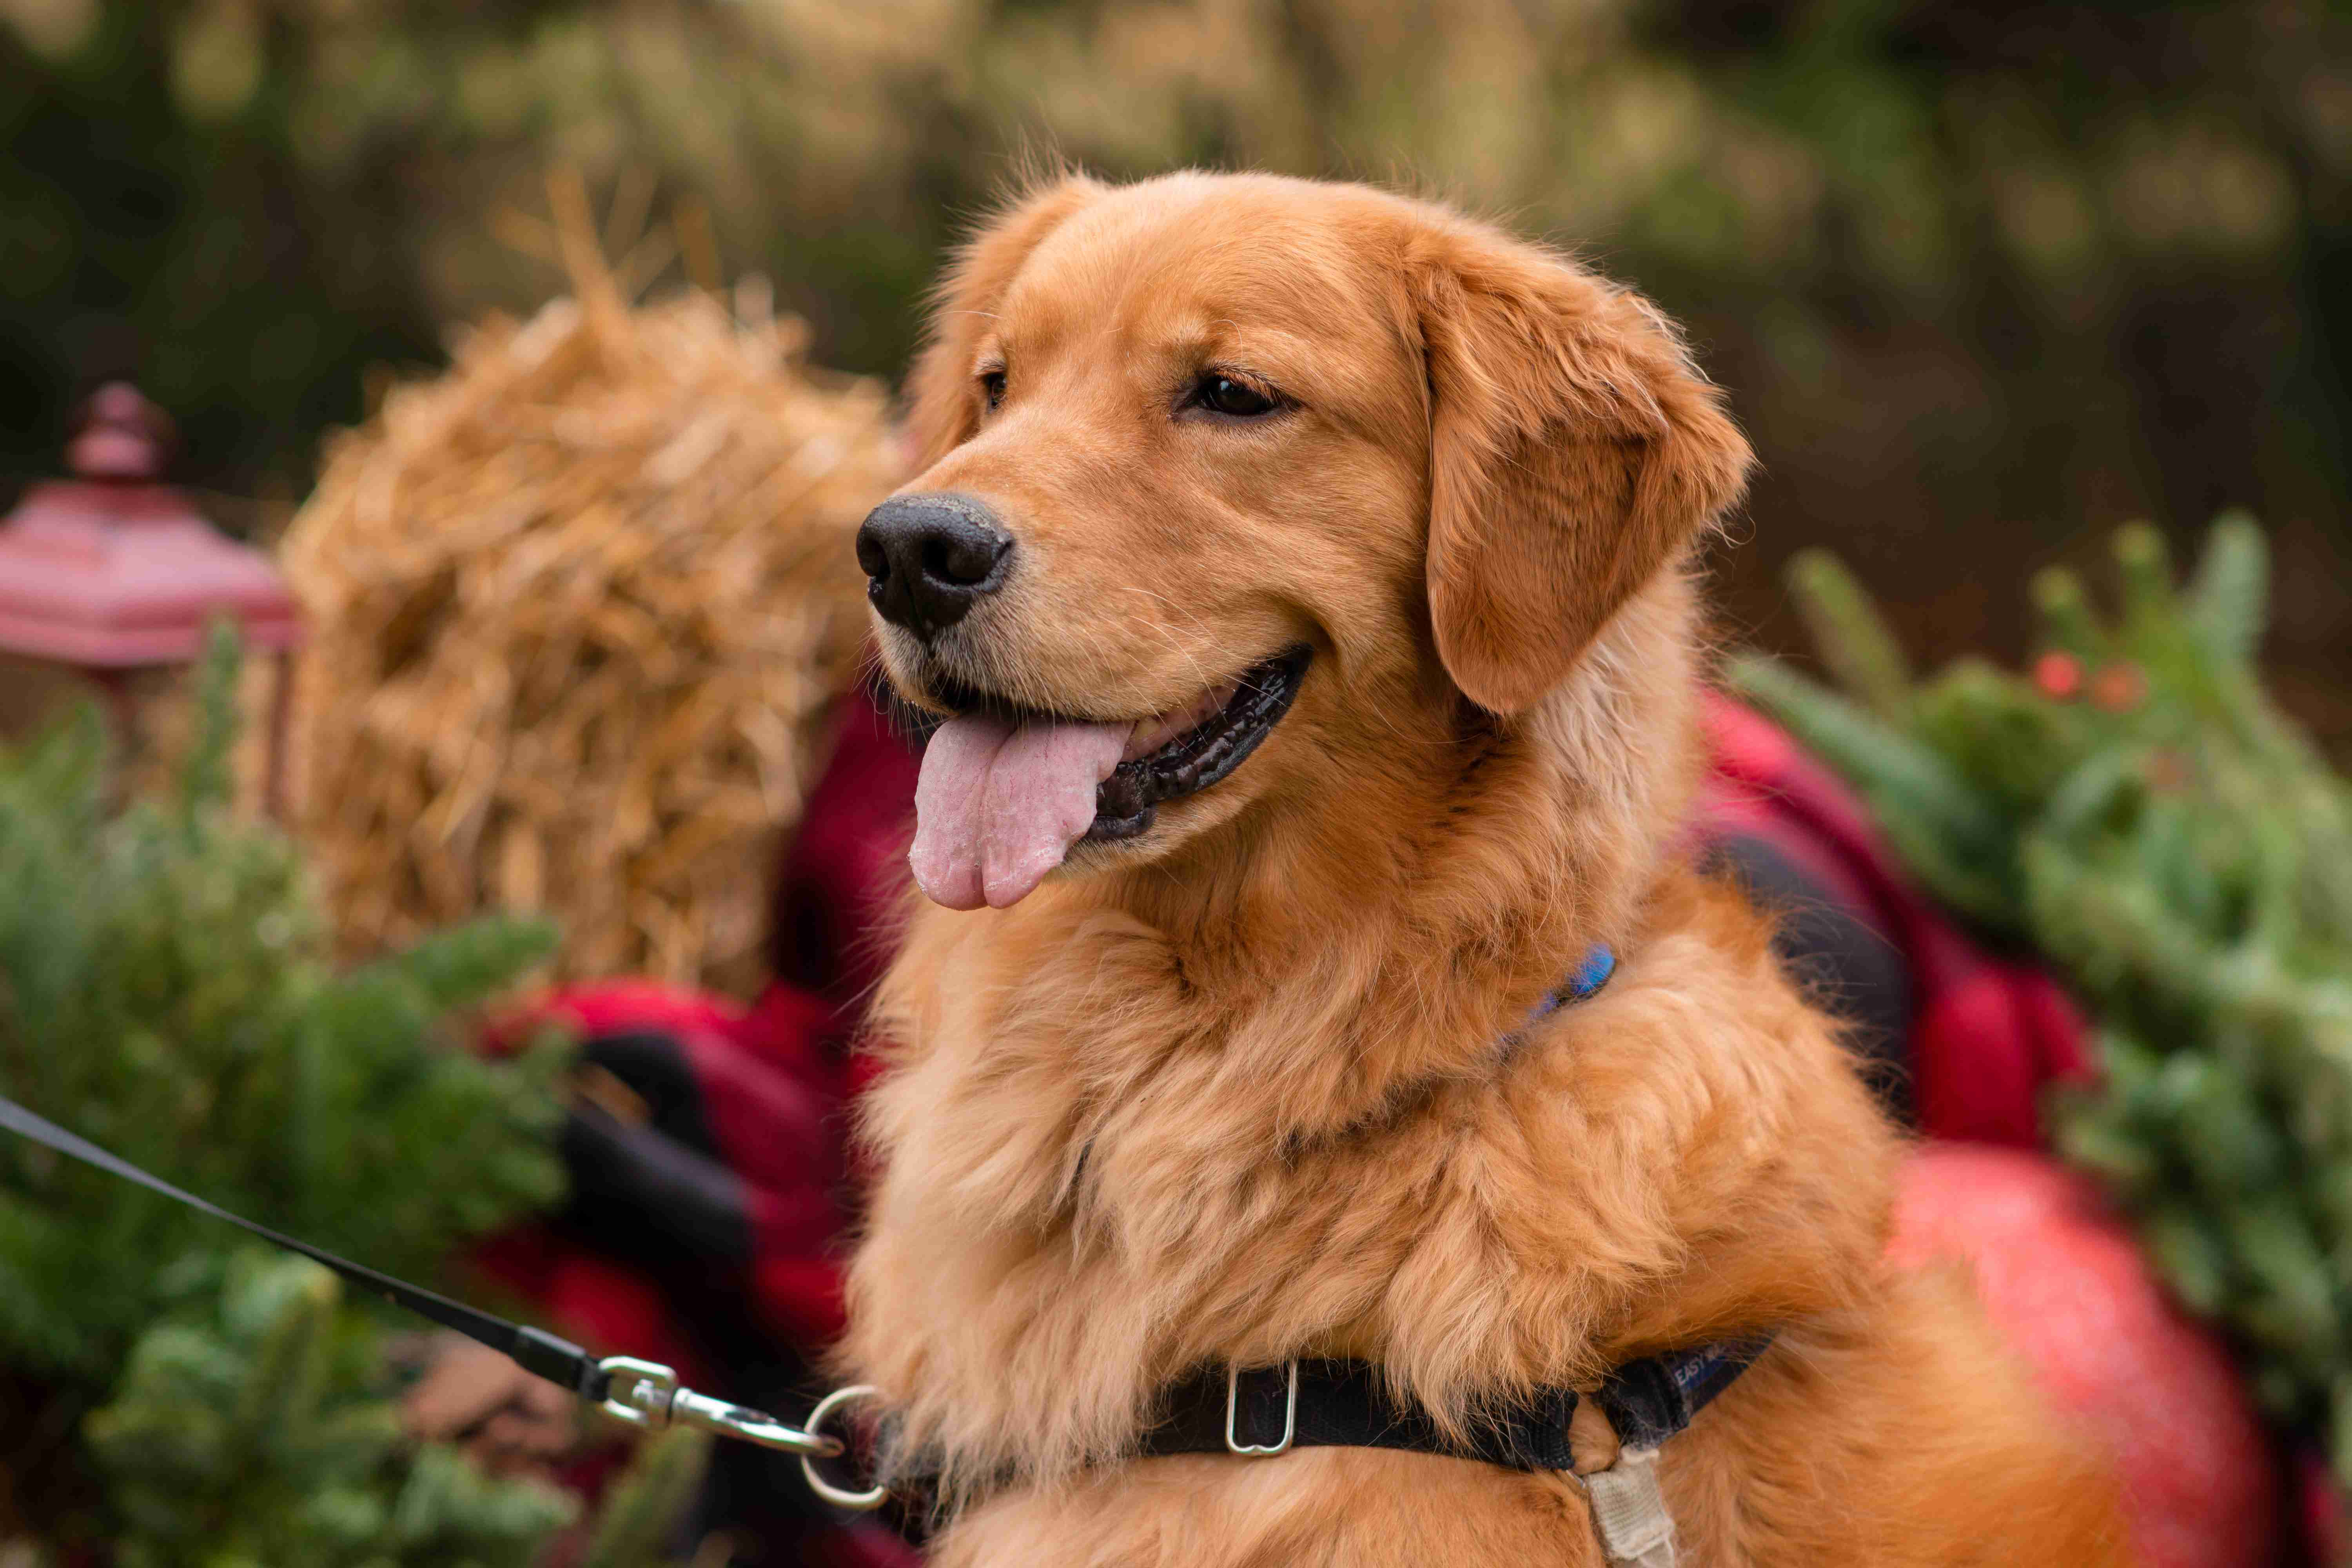 Spotting Addison's Disease in Golden Retrievers: Signs and Symptoms to Look Out For